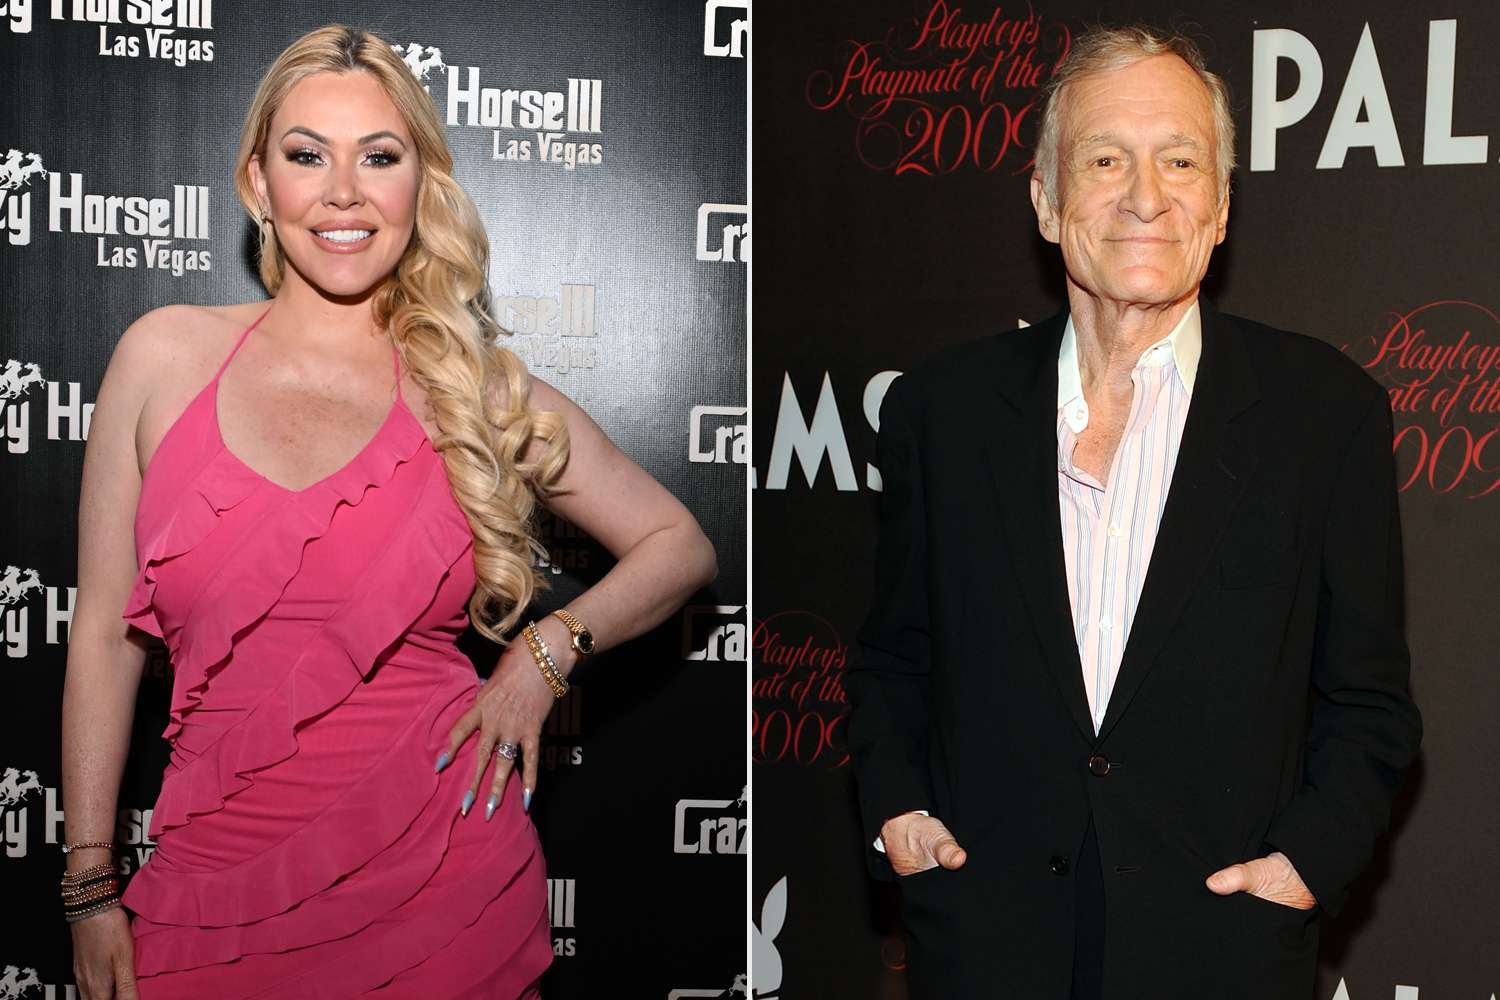 Shanna Moakler Shares Her Experience with Hugh Hefner: ‘The Man Is Dead. He Can’t Defend Himself’ (Exclusive)